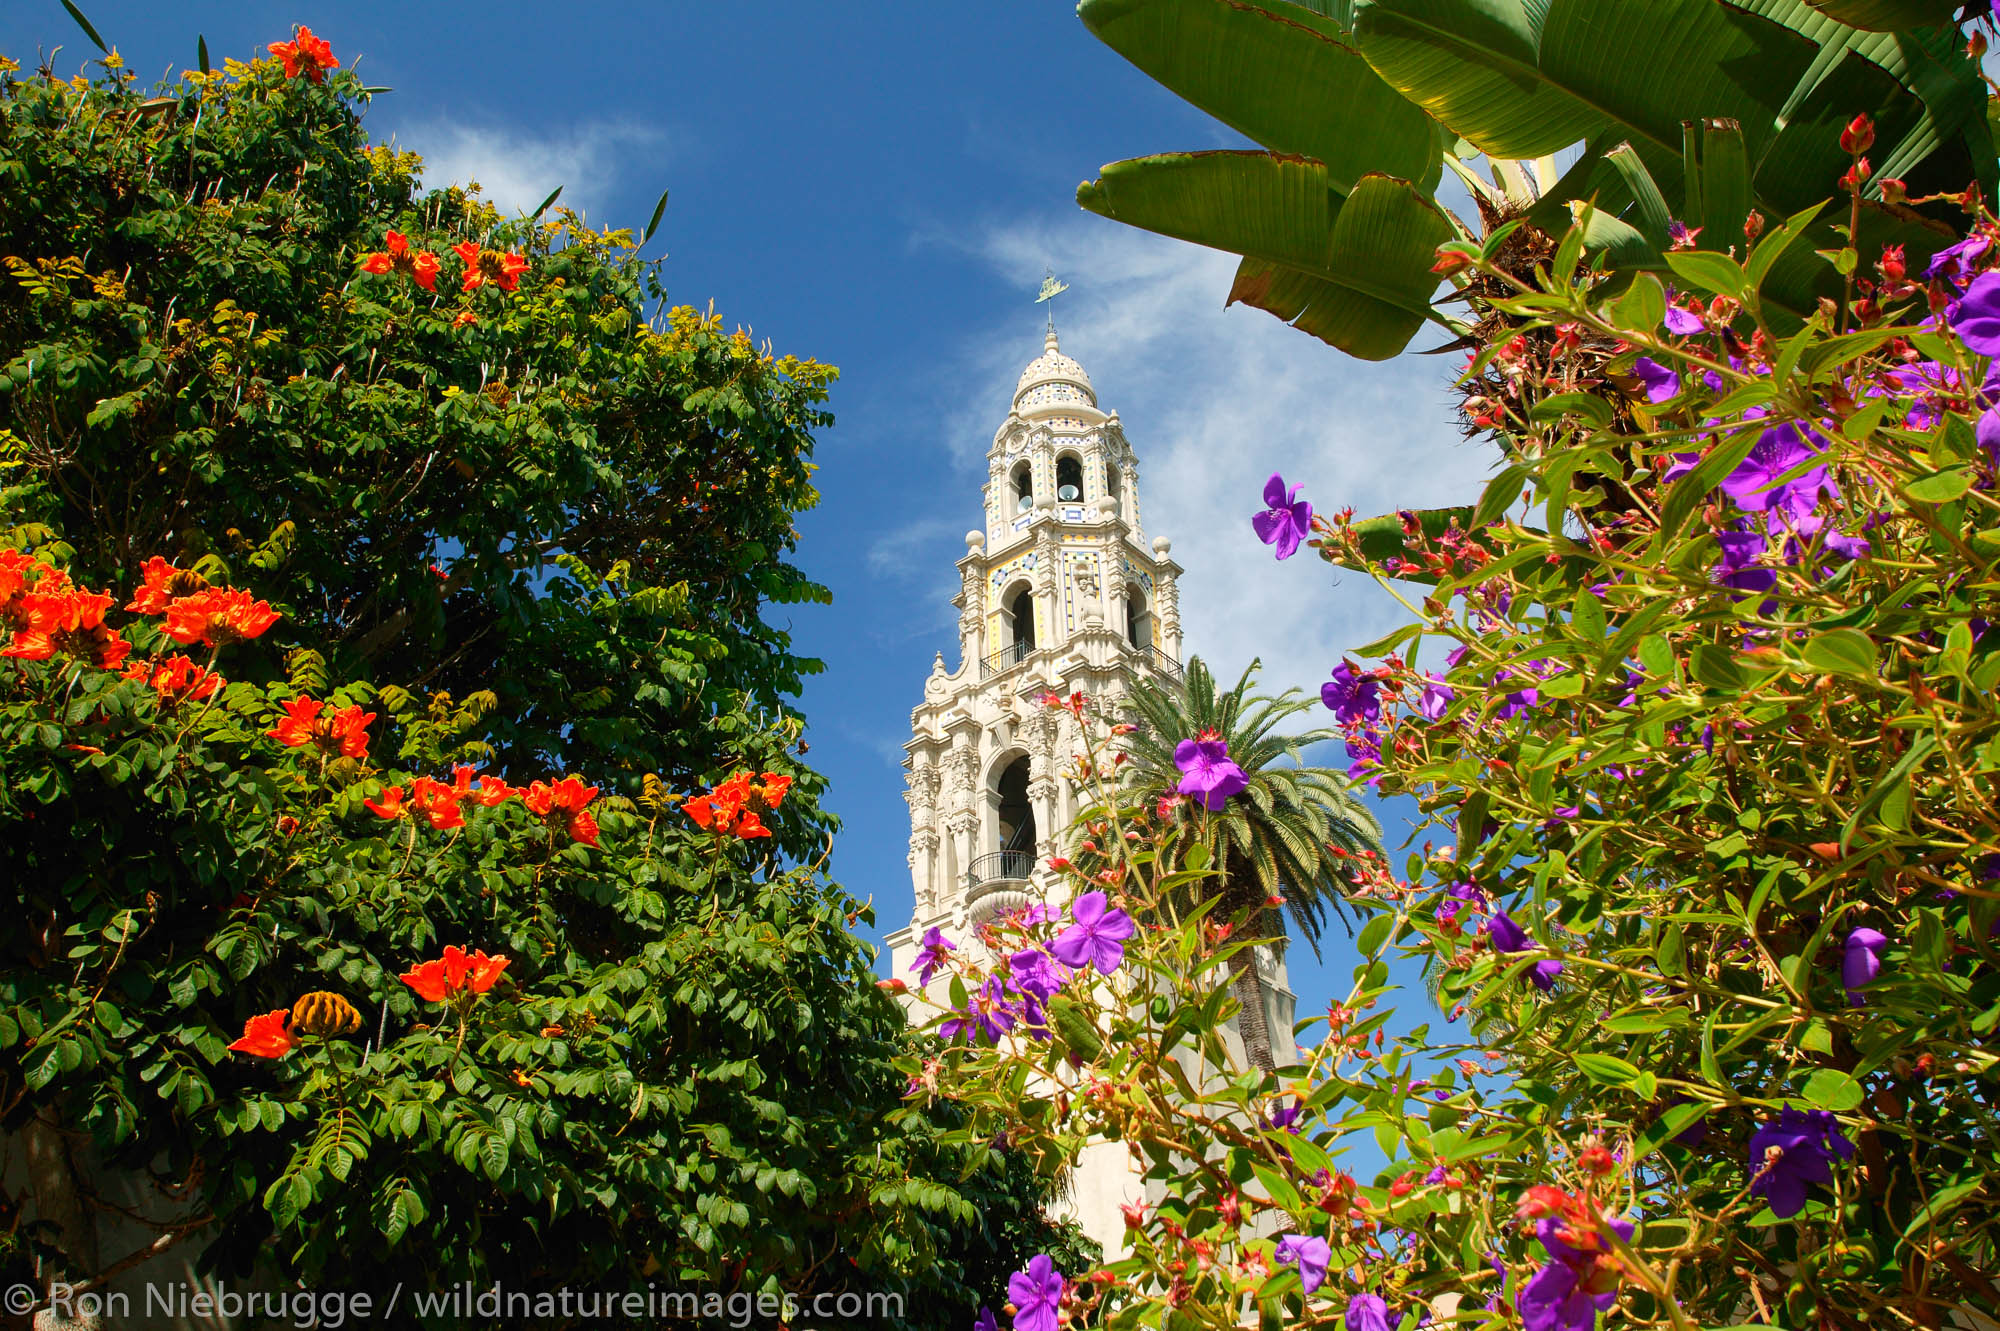 The California Tower and the Museum of Man with the Casa del Rey Moro Garden, Balboa Park, San Diego, California.